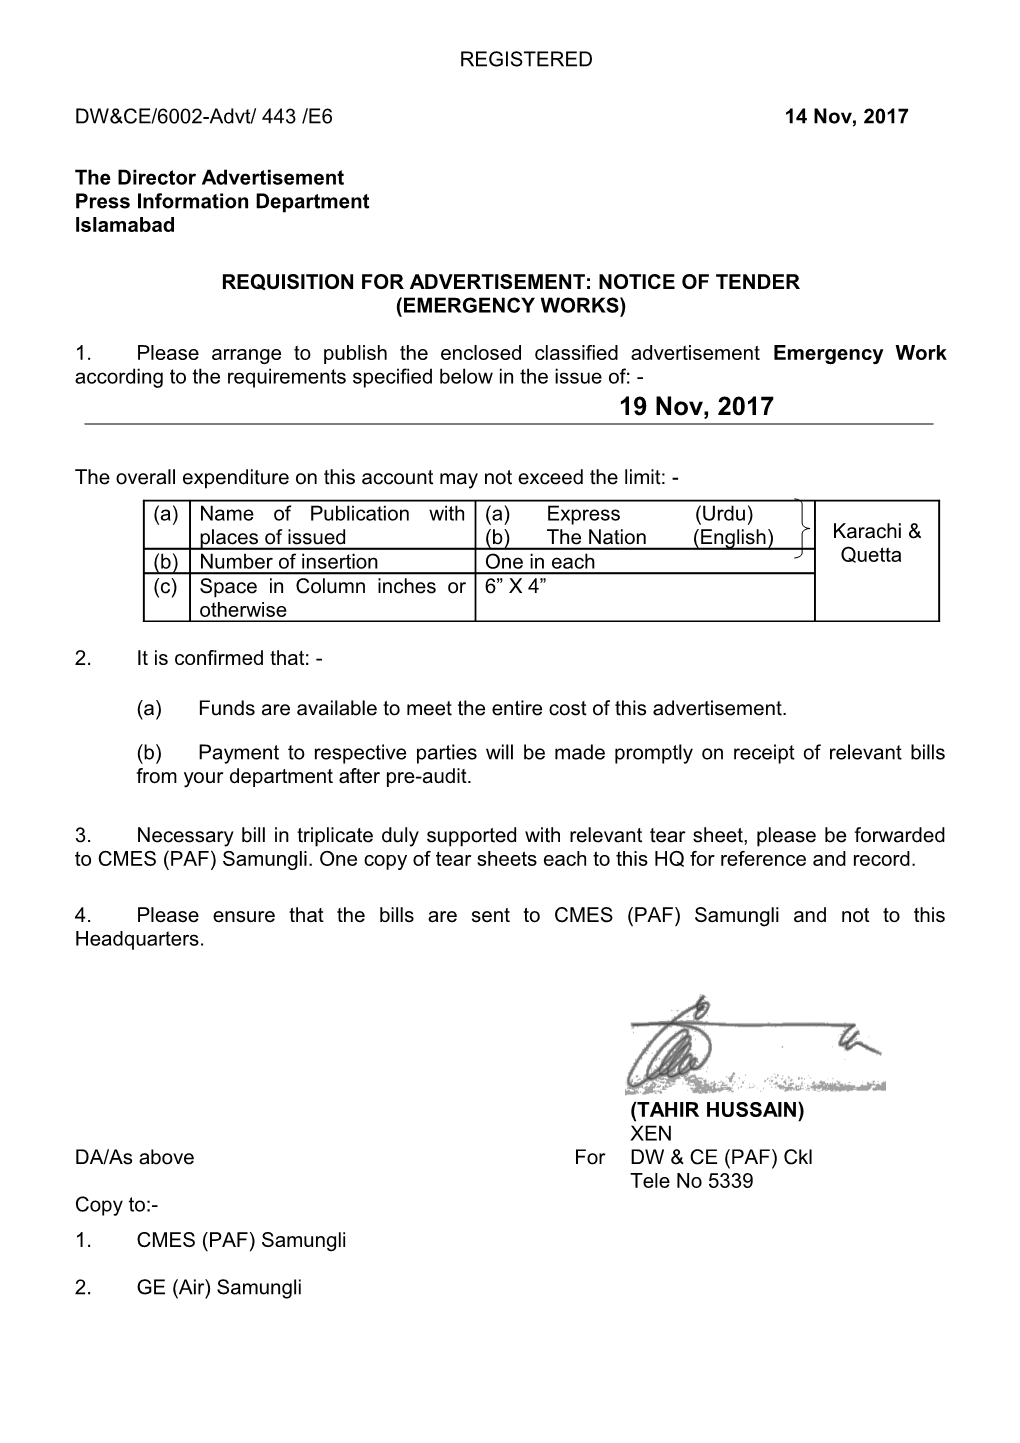 Requisition for Advertisement: Notice of Tender s1